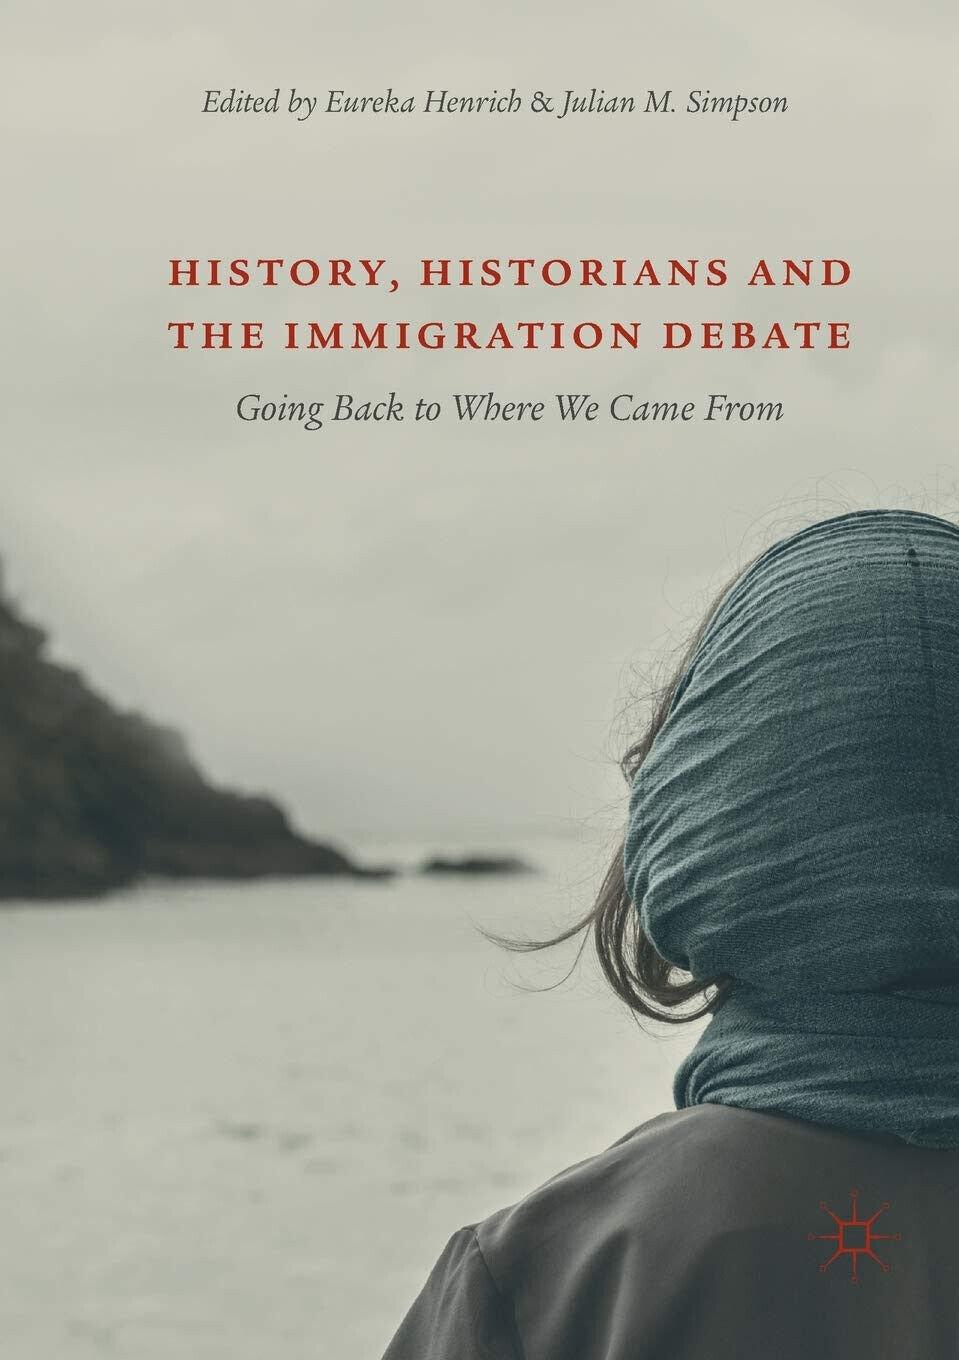 History, Historians and the Immigration Debate - Eureka Henrich - 2019